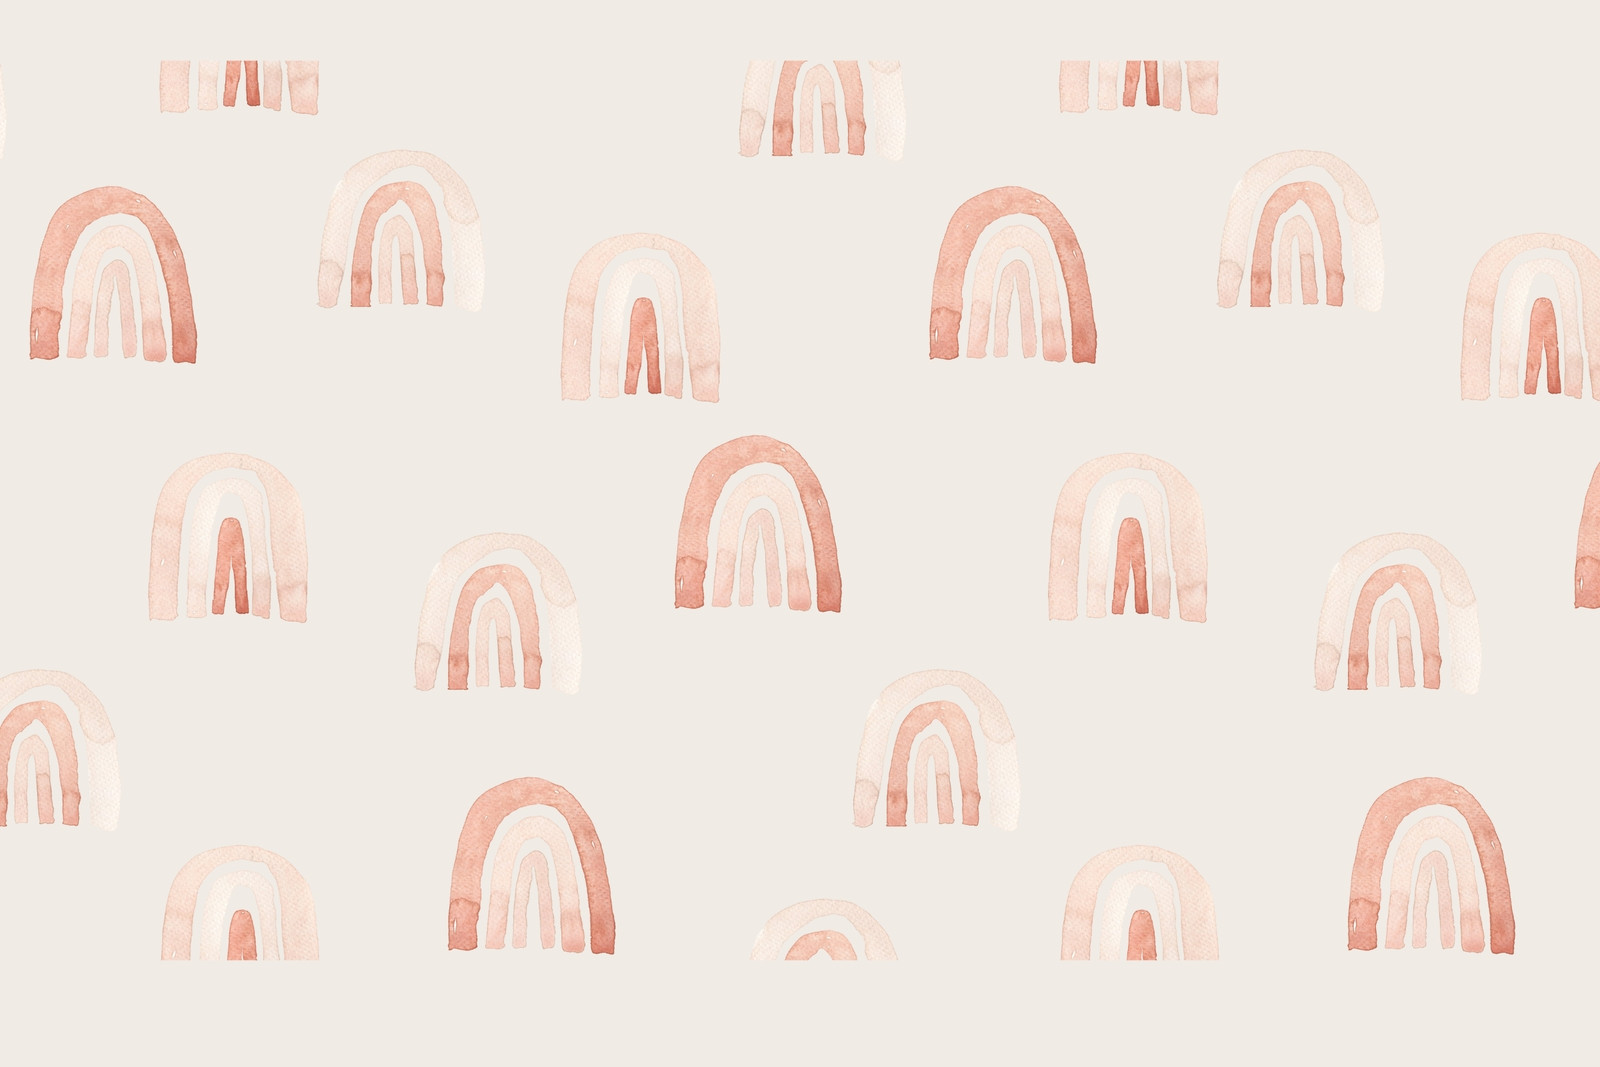 Pink Minimalist Yoga Fitness Background Wallpaper Image For Free Download -  Pngtree